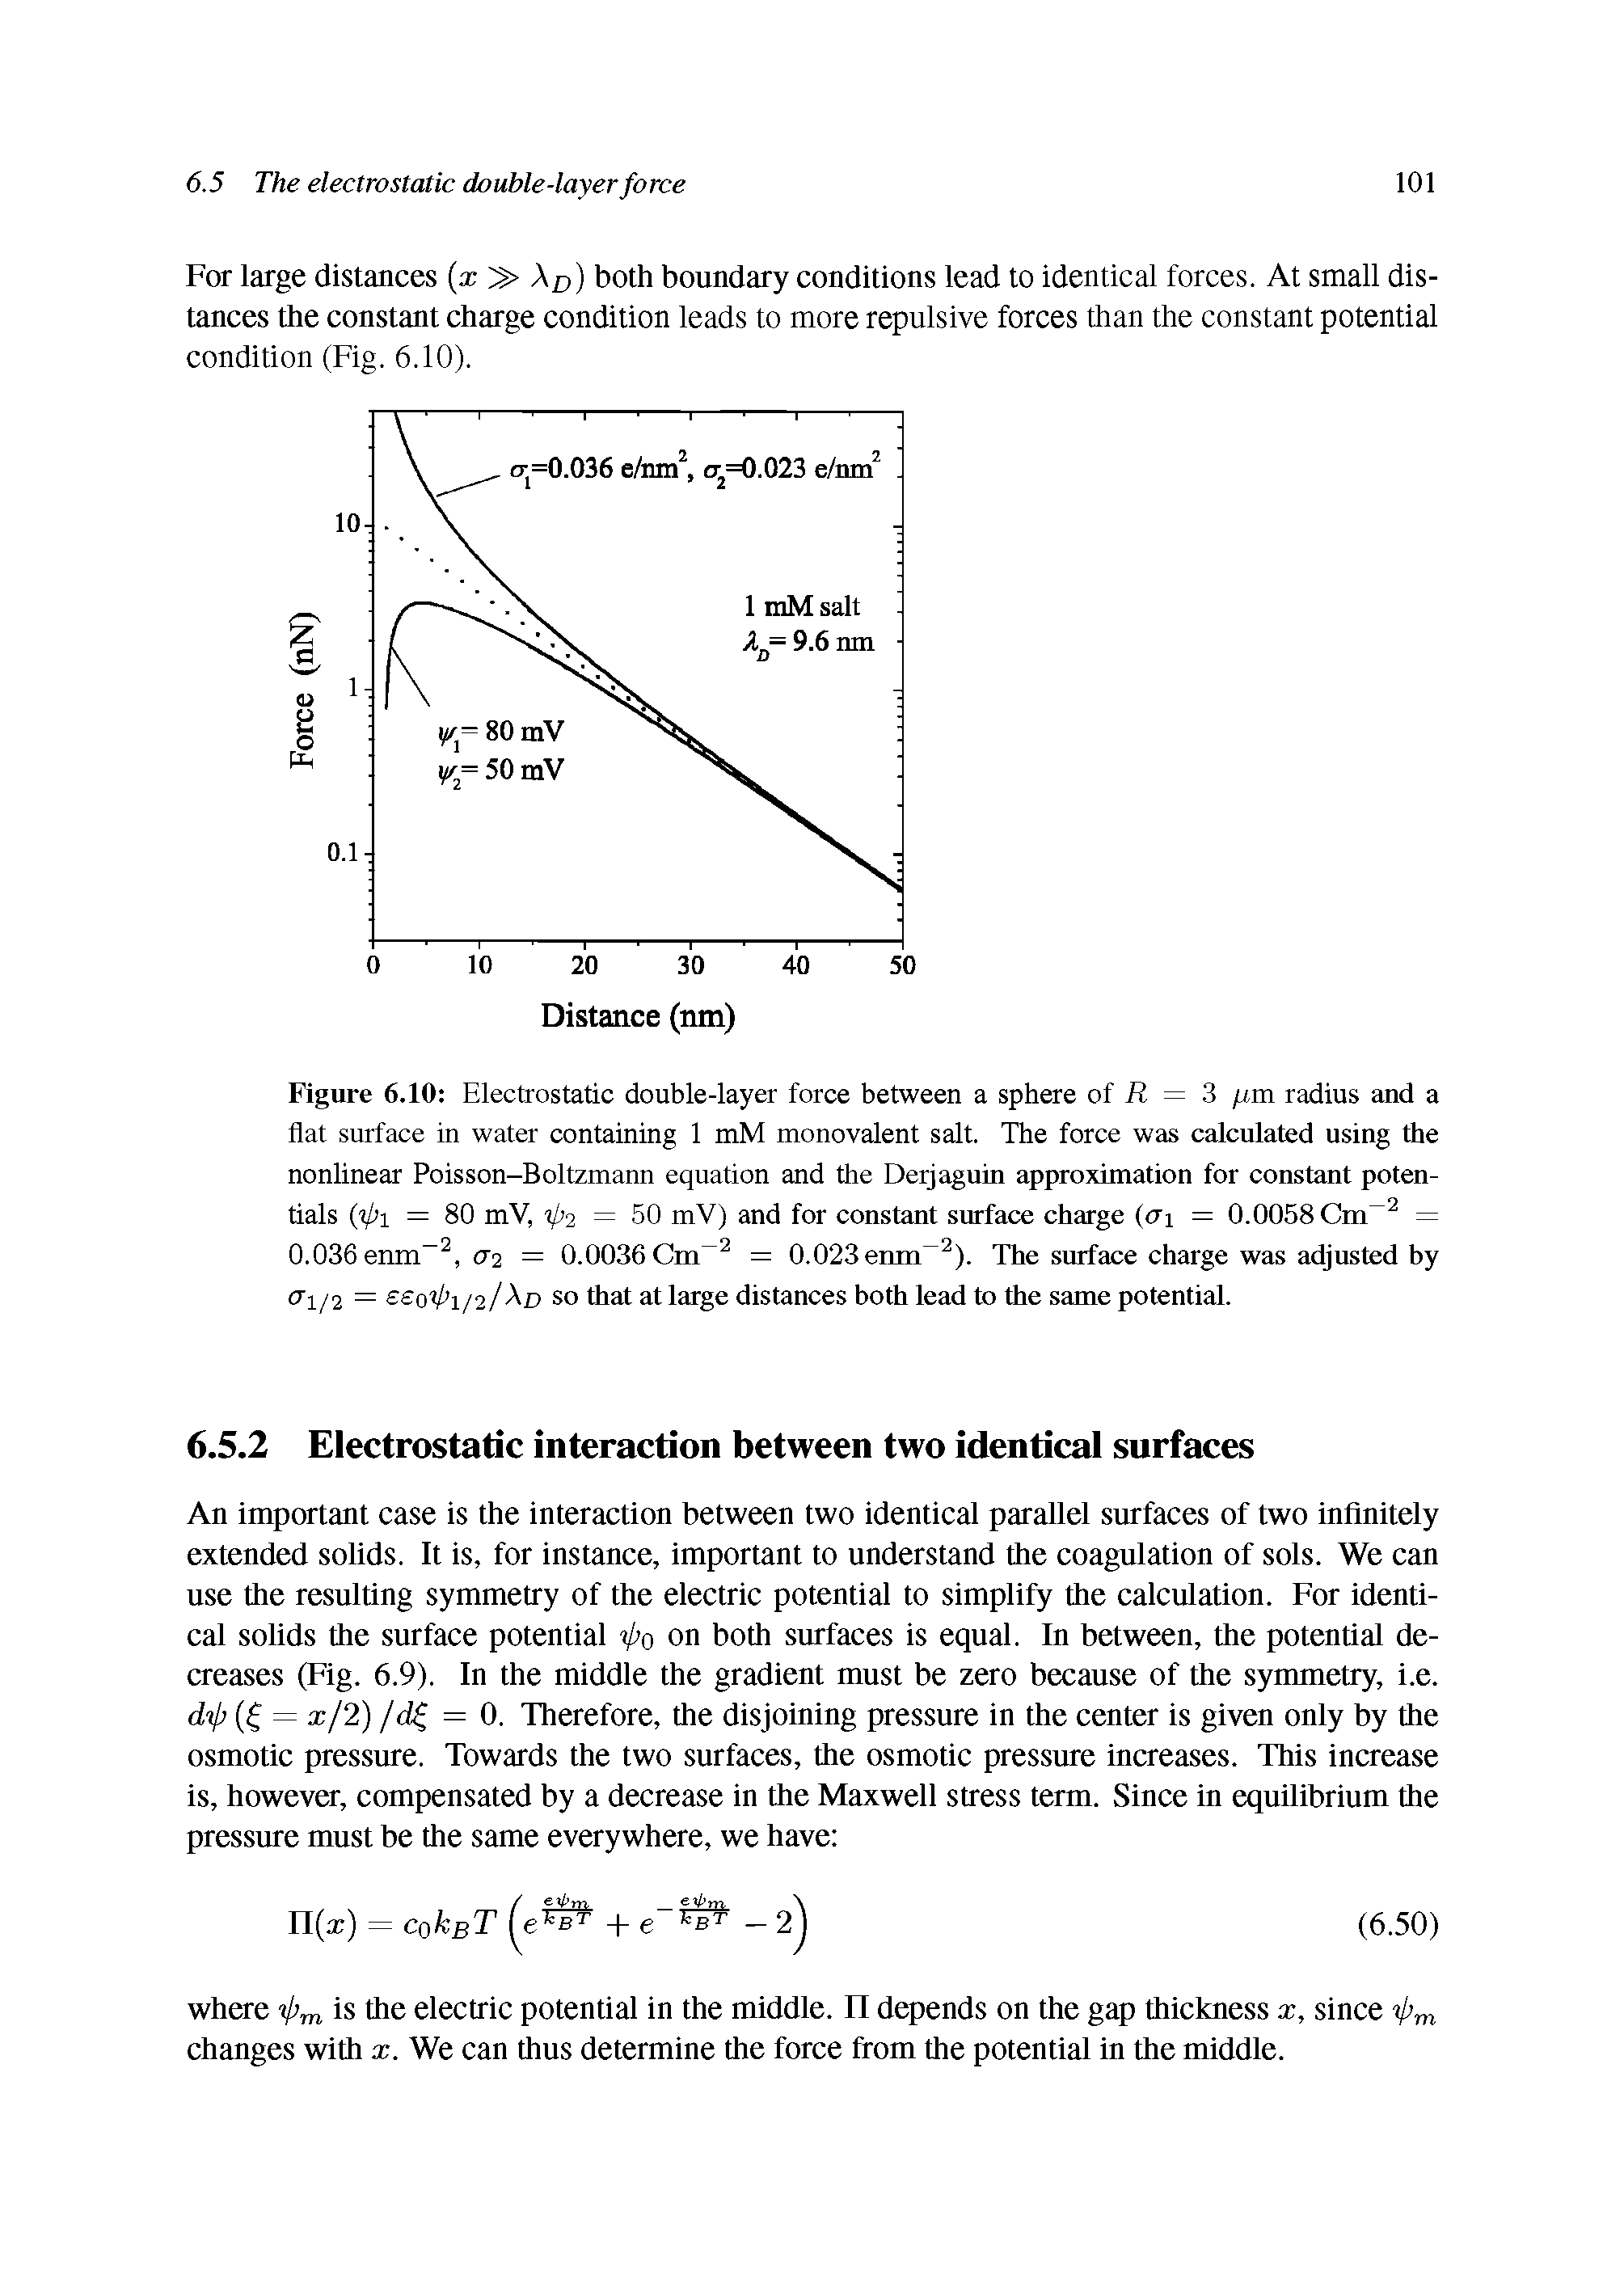 Figure 6.10 Electrostatic double-layer force between a sphere of R = 3 /um radius and a flat surface in water containing 1 mM monovalent salt. The force was calculated using the nonlinear Poisson-Boltzmann equation and the Derjaguin approximation for constant potentials (tpi = 80 mV, ip2 = 50 mV) and for constant surface charge (<Ti = 0.0058 Cm-2 = 0.036 enm-2, (72 = 0.0036 Cm 2 = 0.023erirn 2). The surface charge was adjusted by (71/2 = cc0)/>i/2/Ad so that at large distances both lead to the same potential.